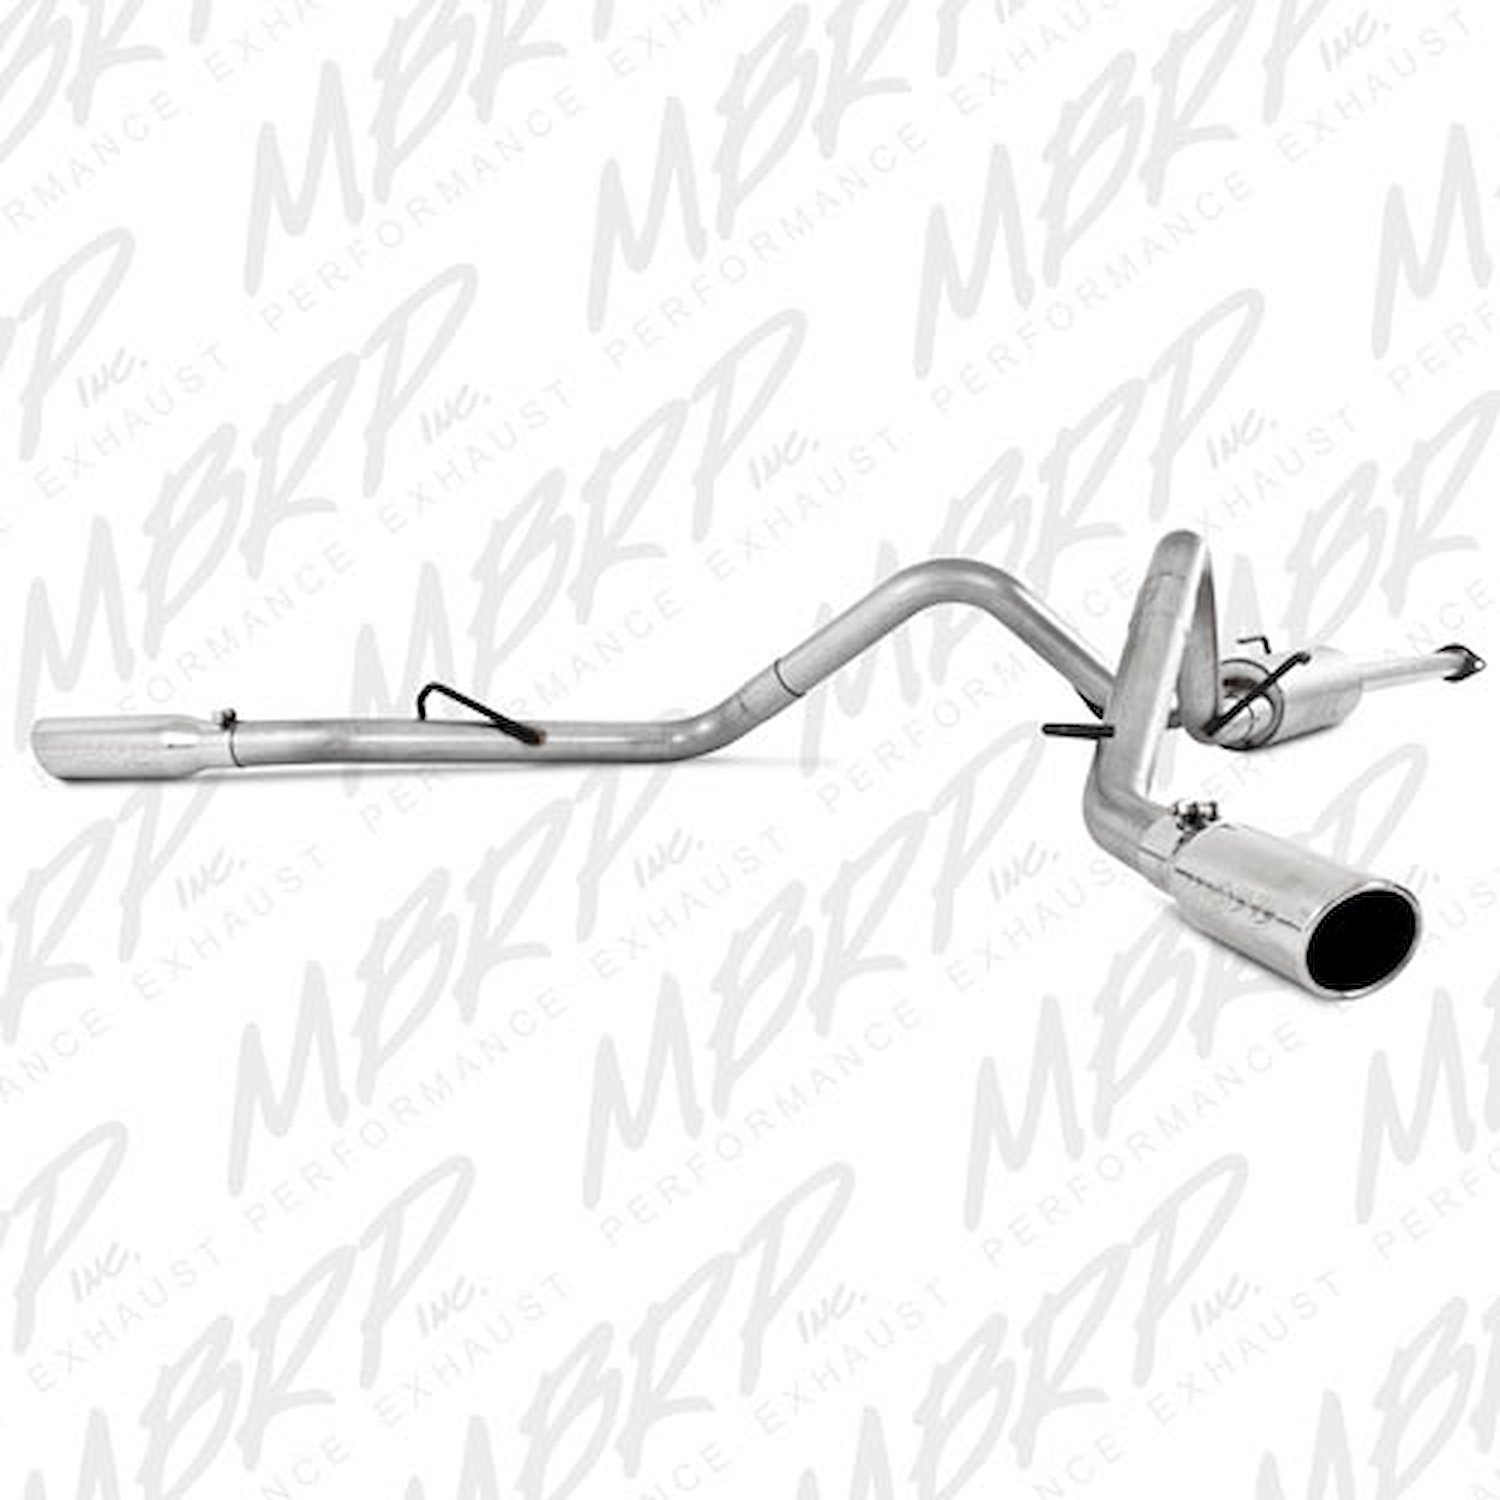 Installer Series Exhaust System 2005-2015 Toyota Tacoma 4.0L